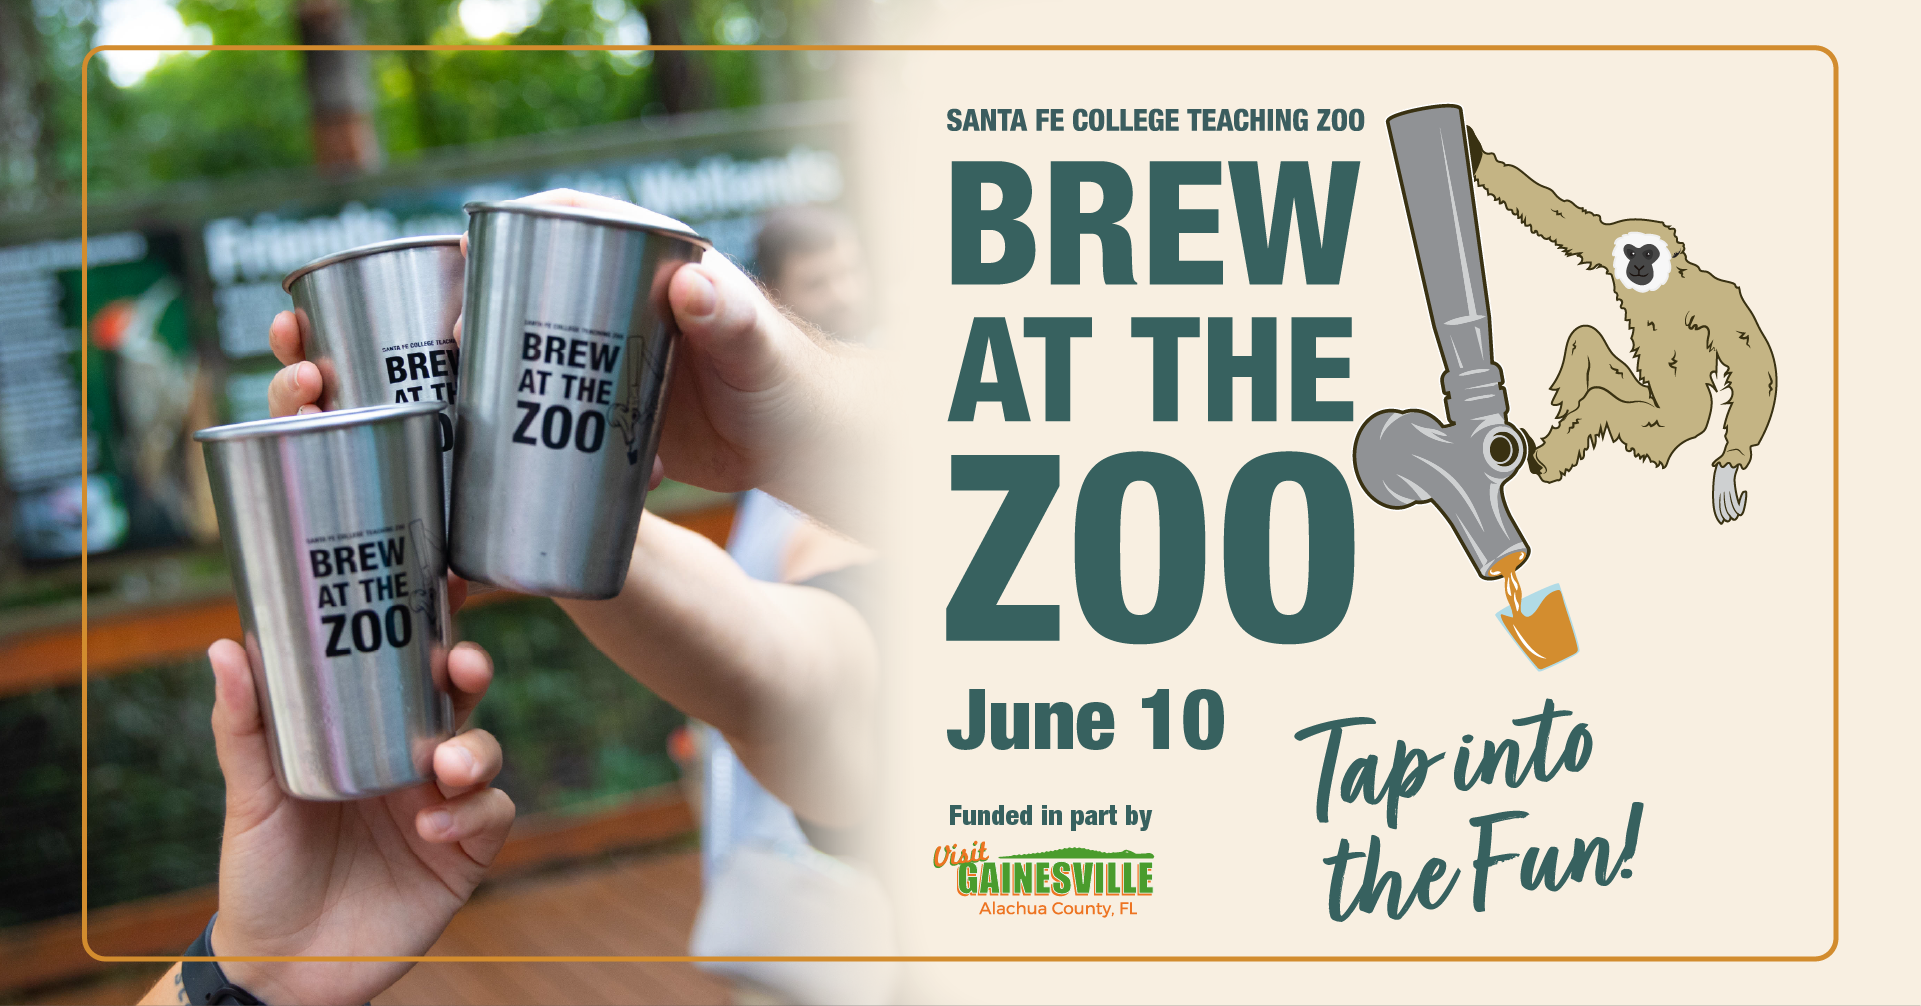 Brew at the Zoo, June 10. Tap into the Fun! Image of gibbon hanging onto beer tap, and 3 stainless steel brew at the zoo cups cheersing